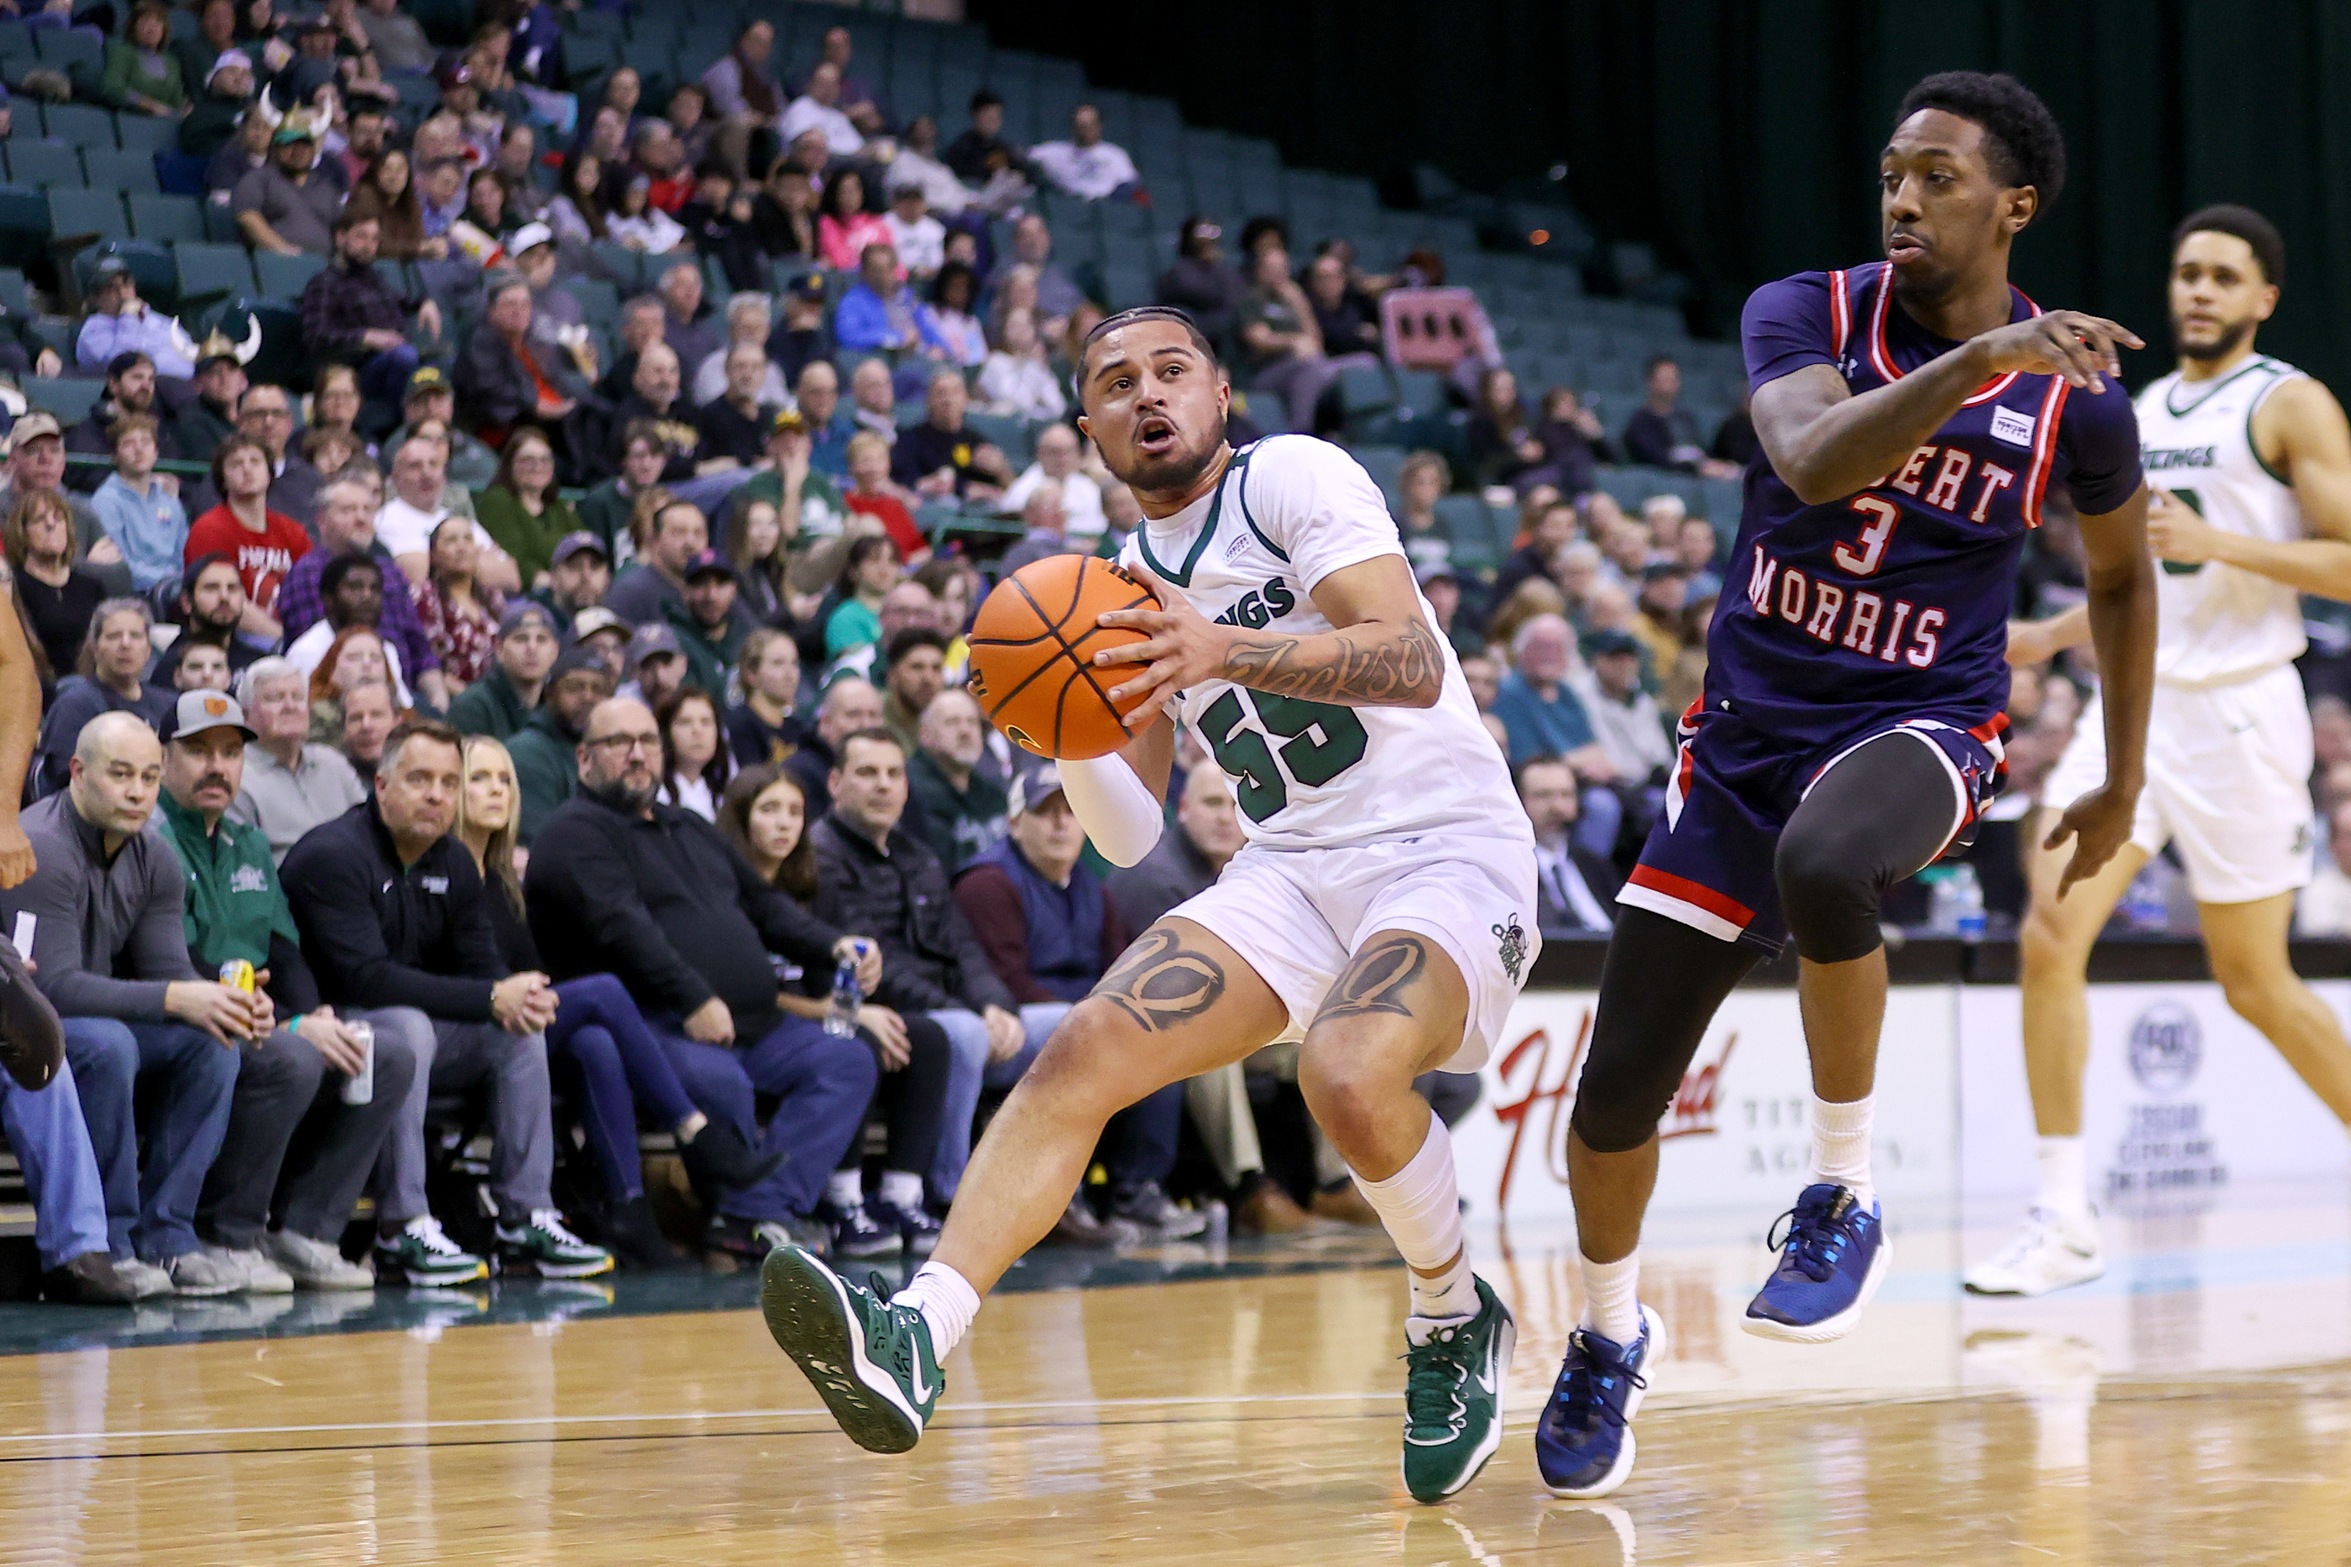 Viking Victory: Cleveland State Men’s Basketball Advances to Horizon League Semifinals with Thrilling Win over Robert Morris